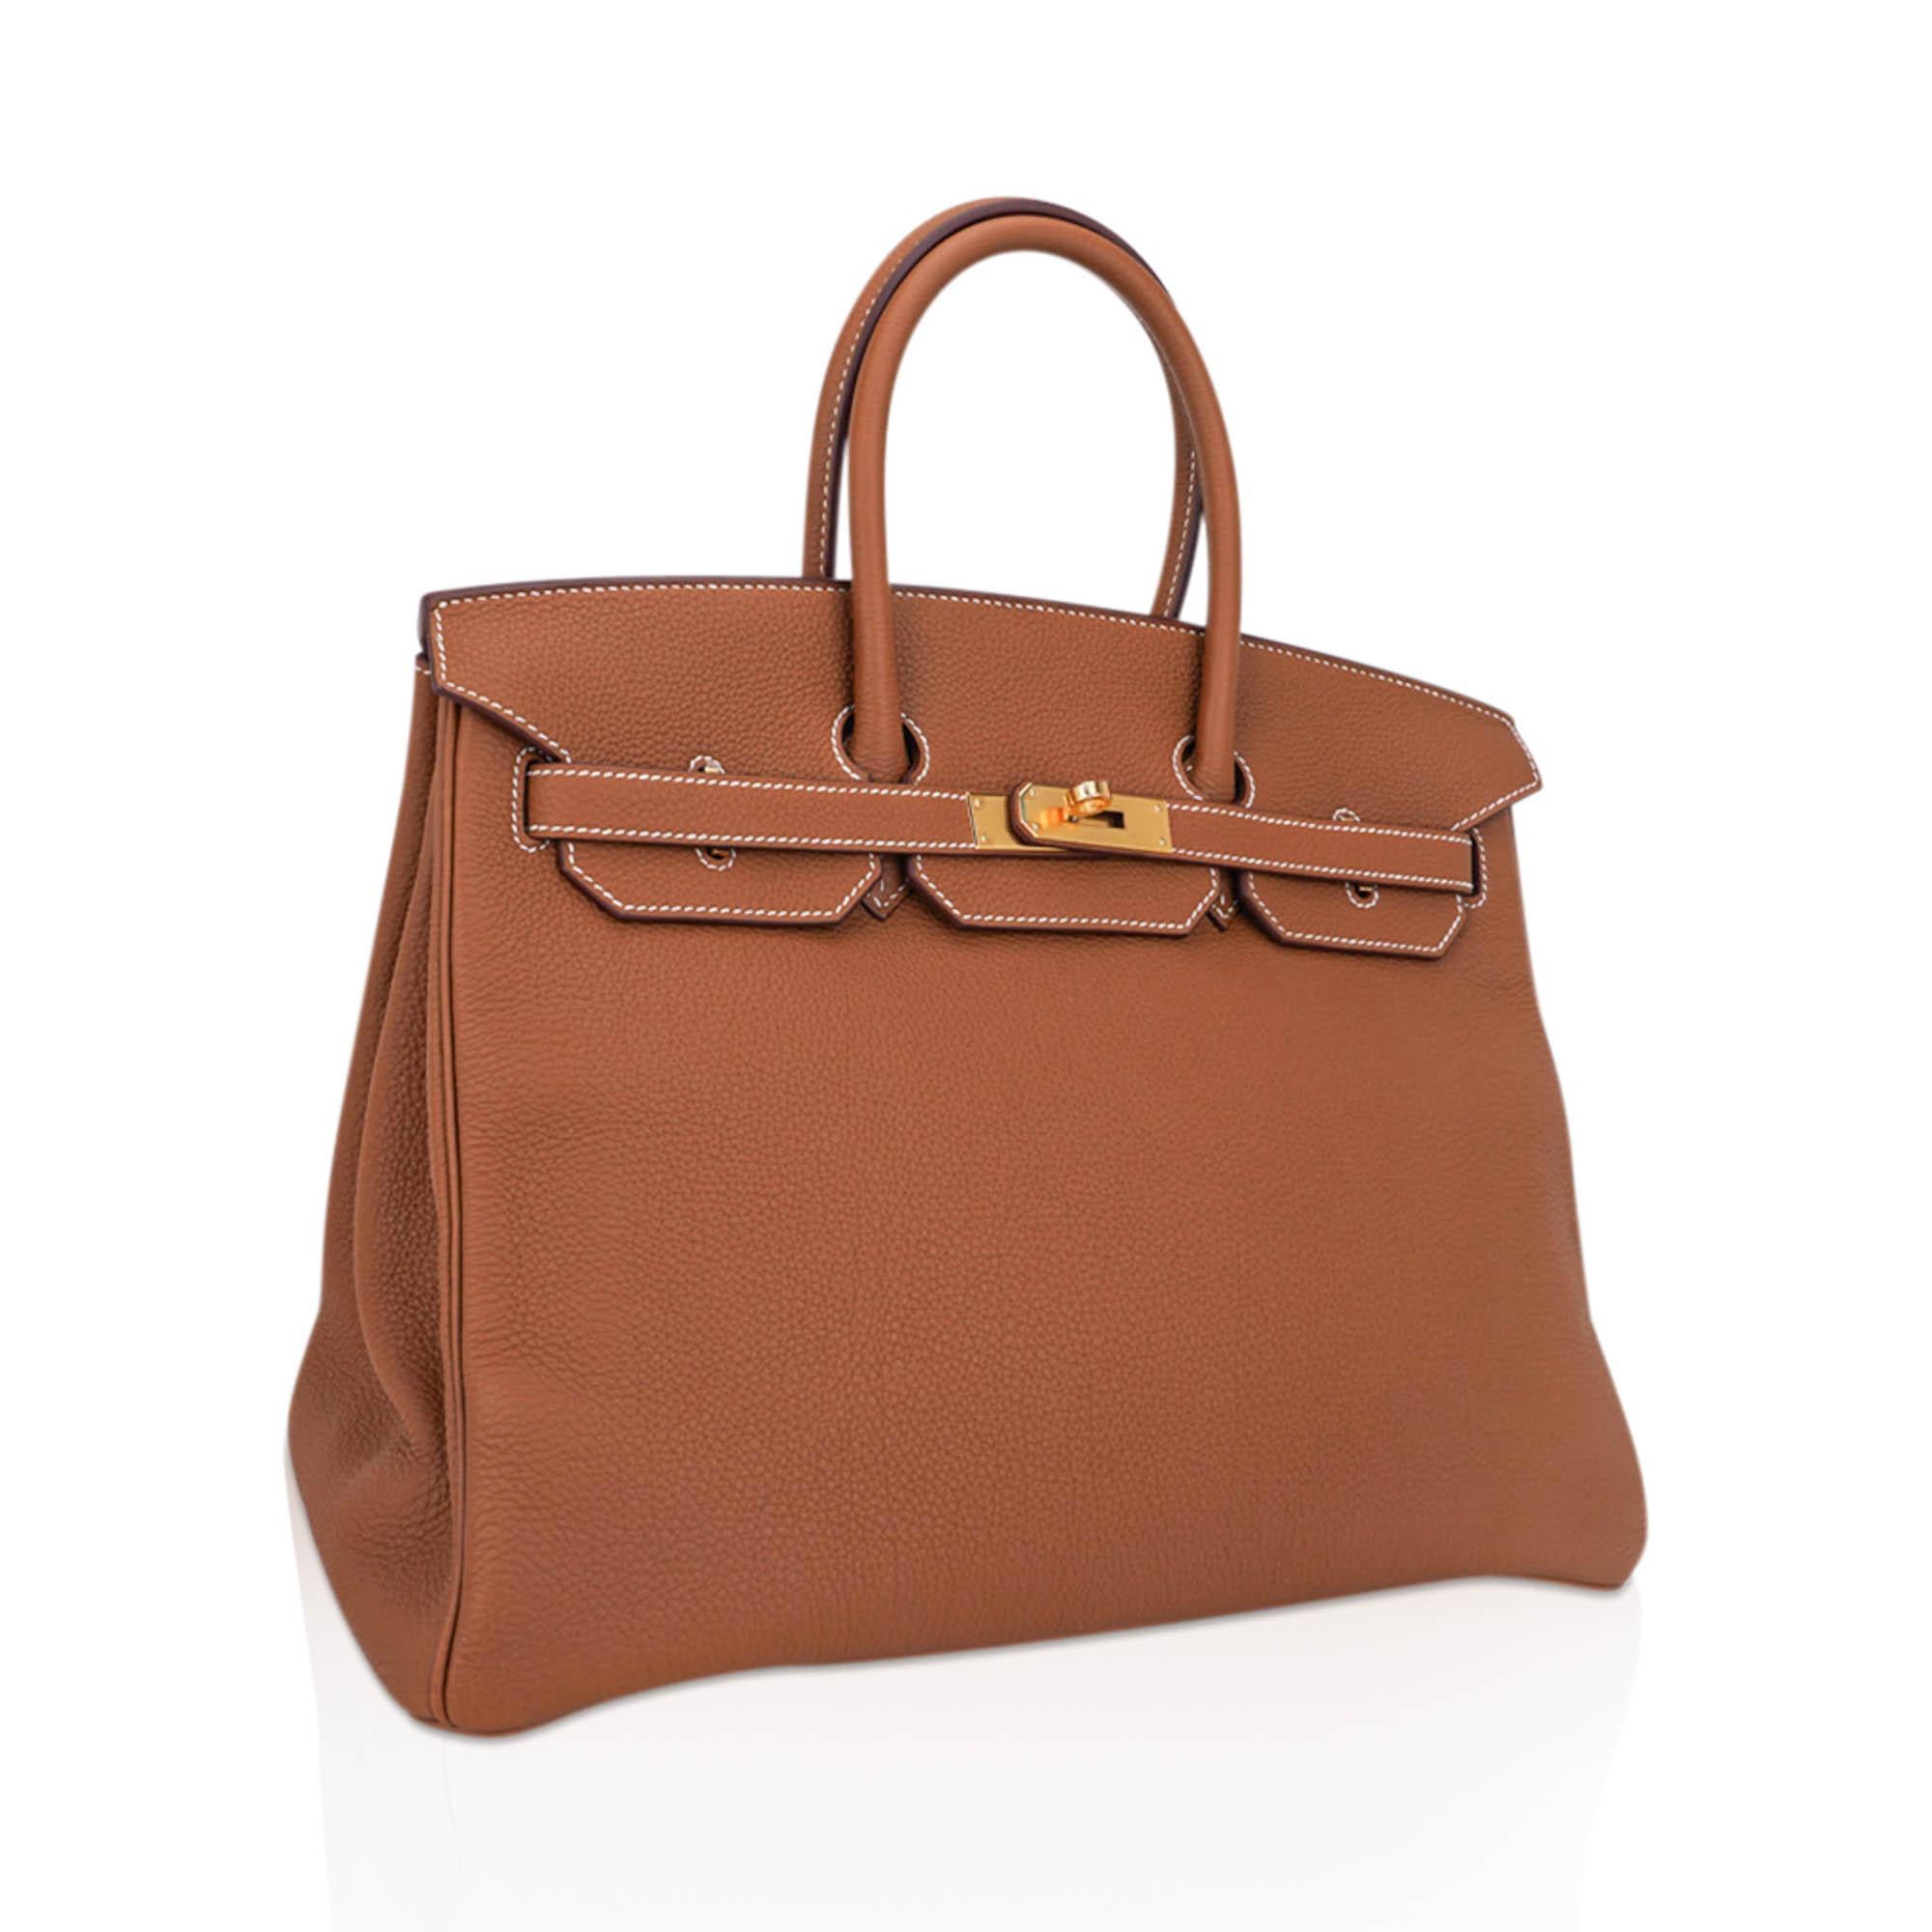 Mightychic offers an Hermes Birkin bag featured in iconic Gold.
Togo is soft and scratch resistant.
Lush with gold hardware.
This coveted Gold Hermes Birkin bag is the perfect addition to any Hermes handbag collection.
Comes with lock, keys,